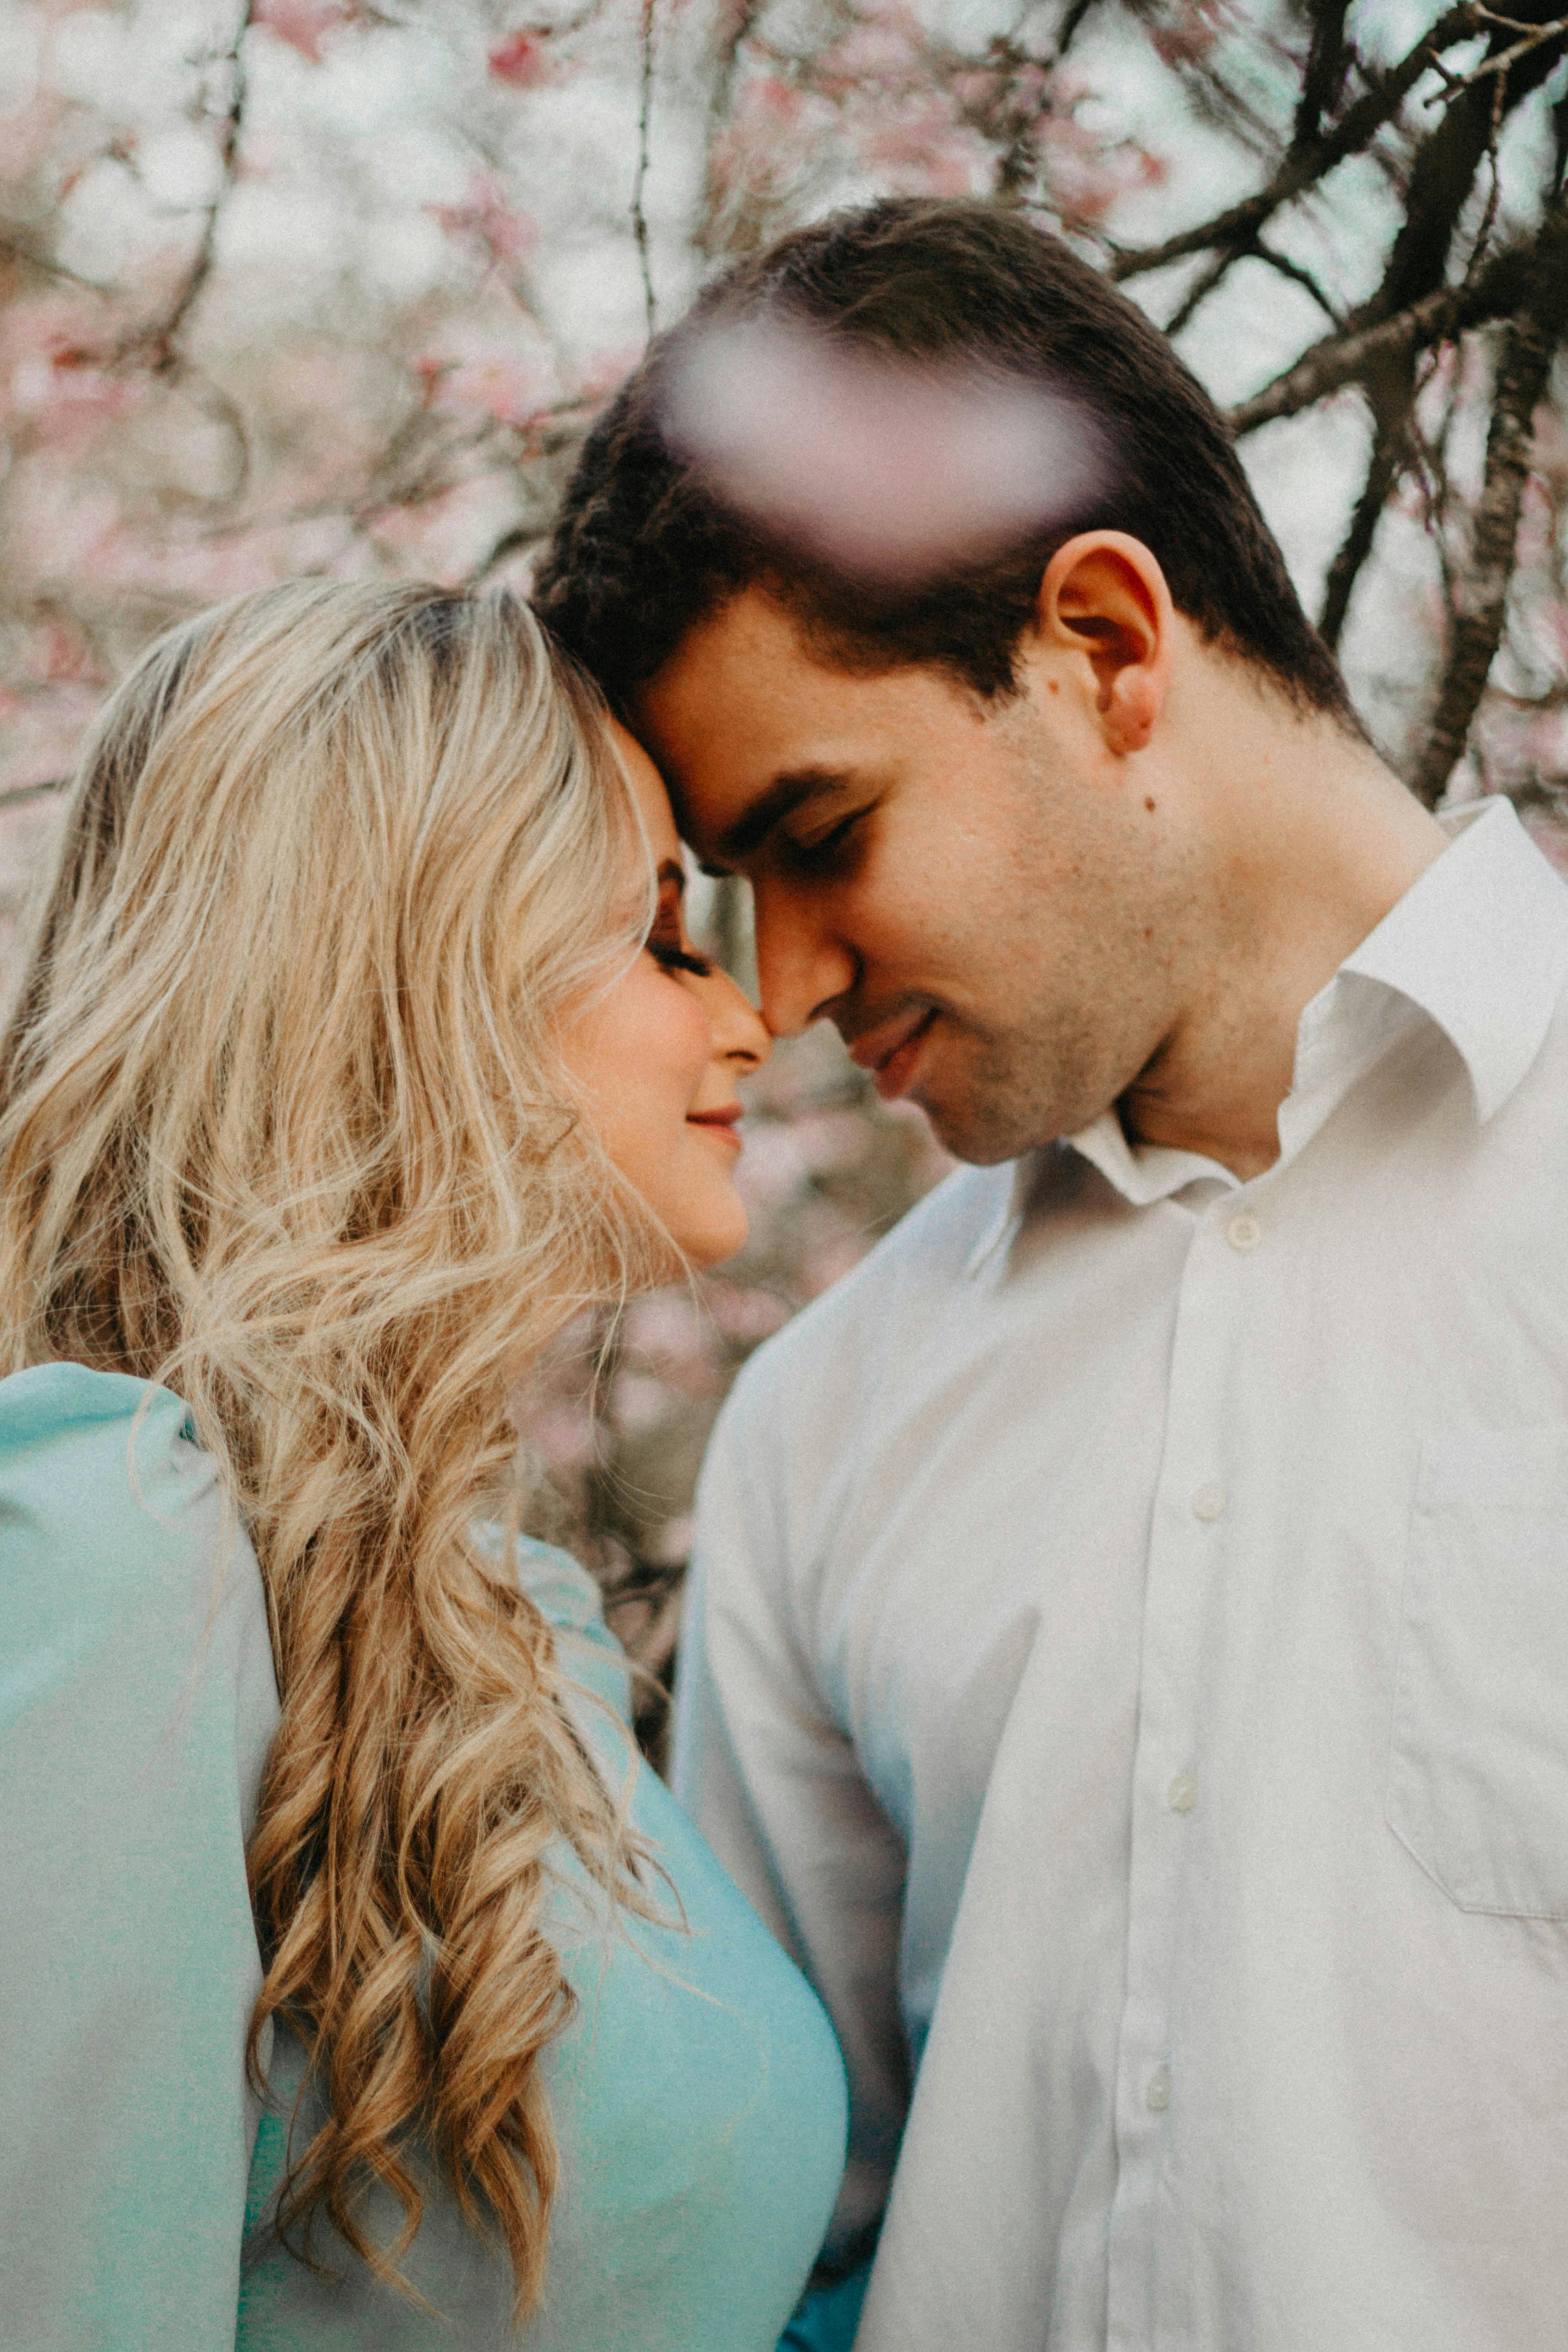 Posing Prompts to Help Couples Feel Carefree | Photobug Community